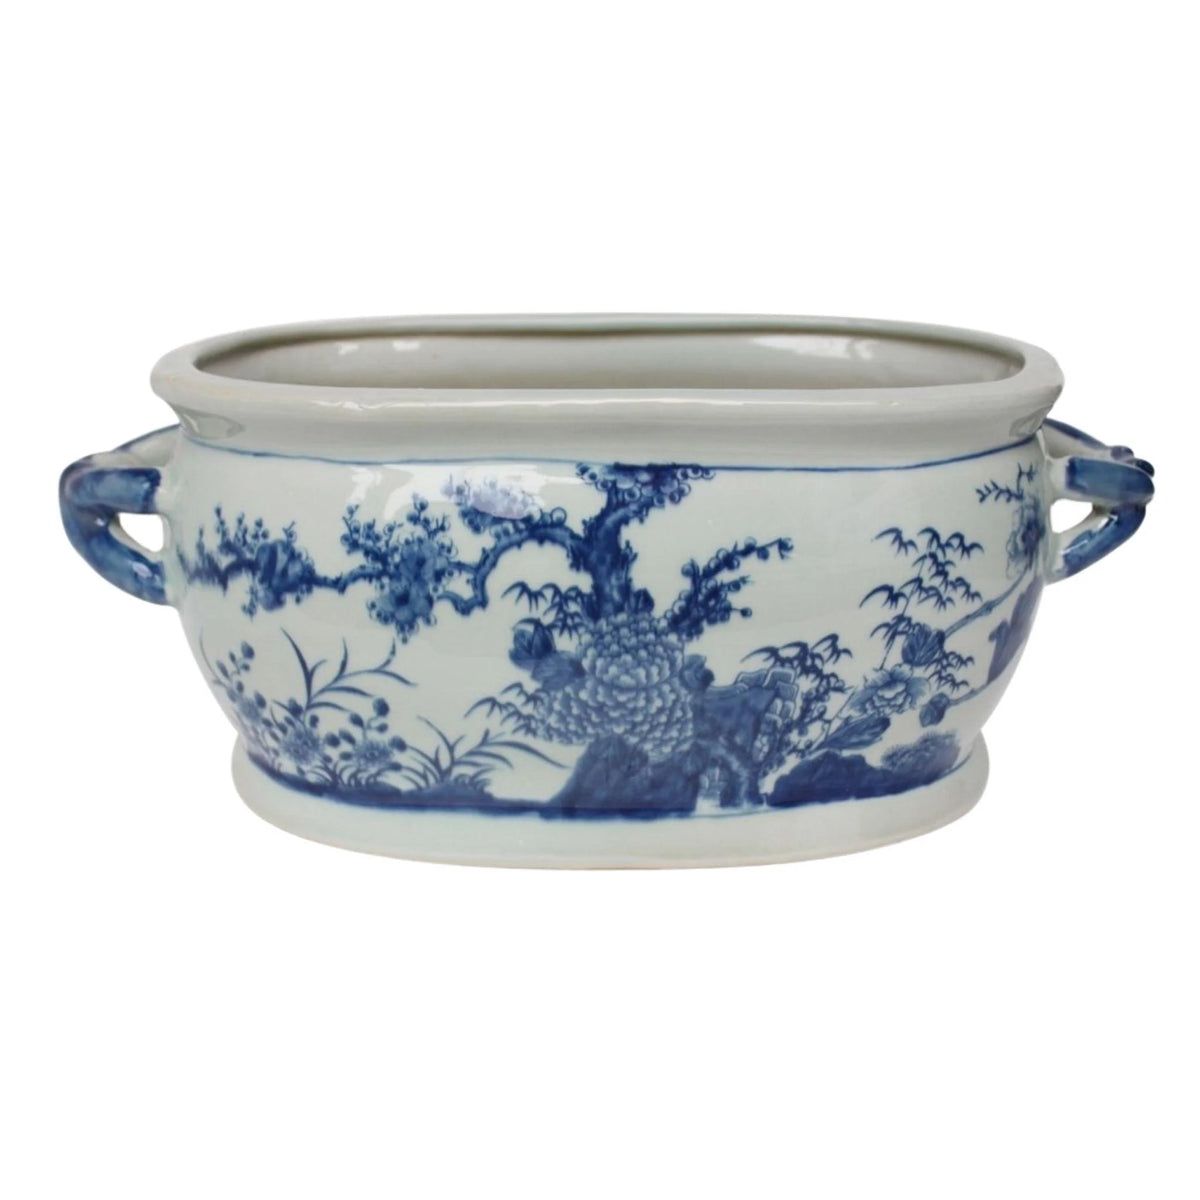 Blue And White Porcelain Four Season Foot Bath Planter | The Well Appointed House, LLC